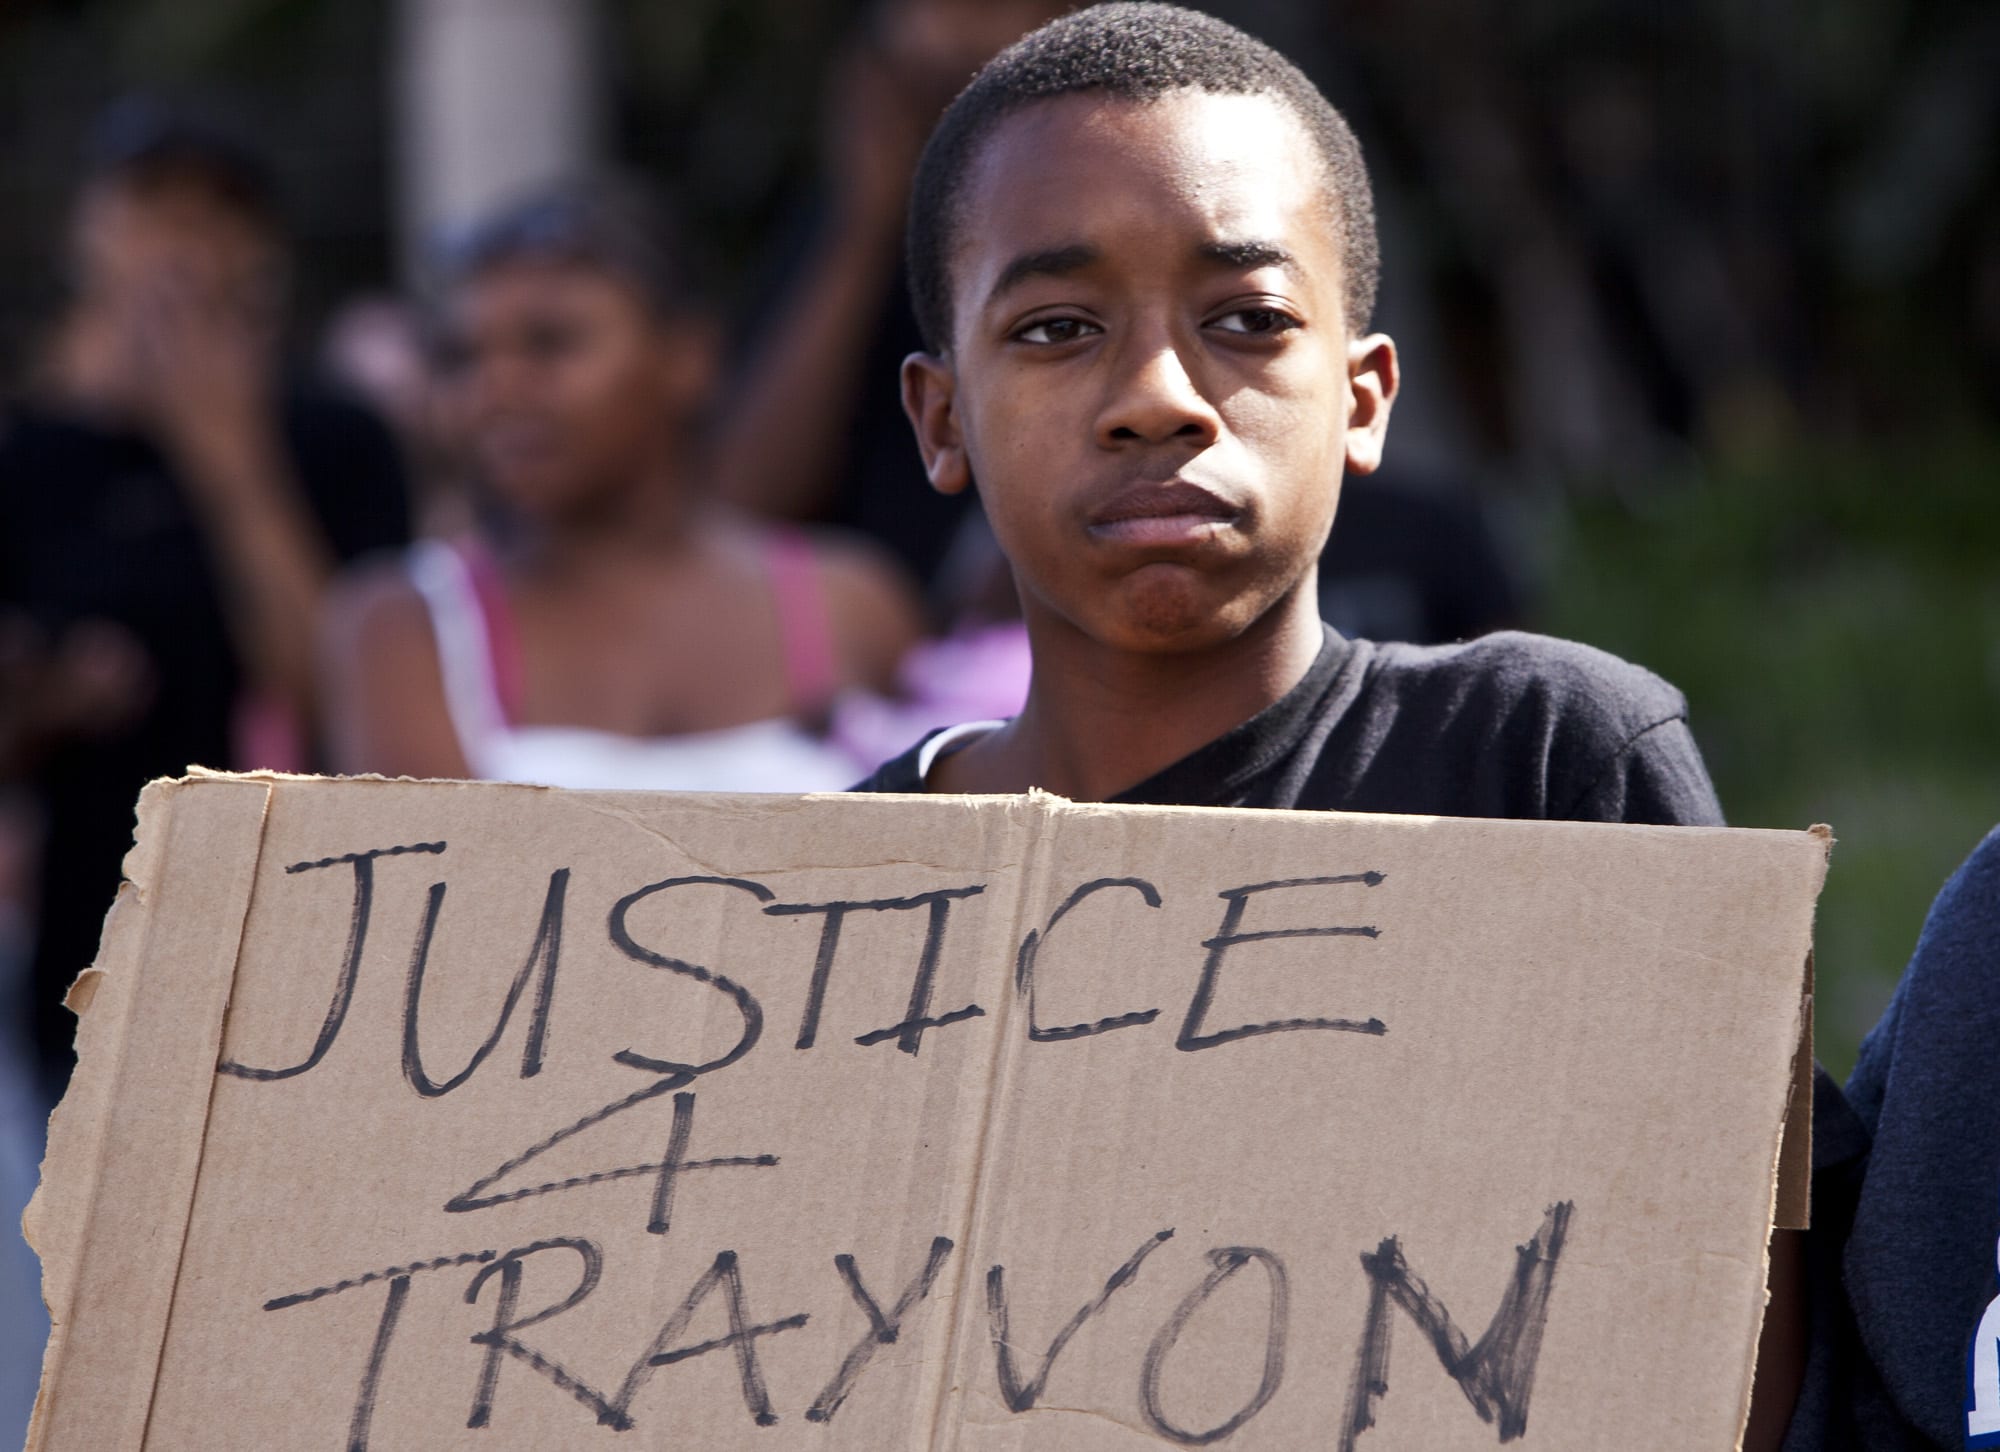 5 Years After His Death, Trayvon Martin Still Impacts the Future of #BlackLivesMatter ...